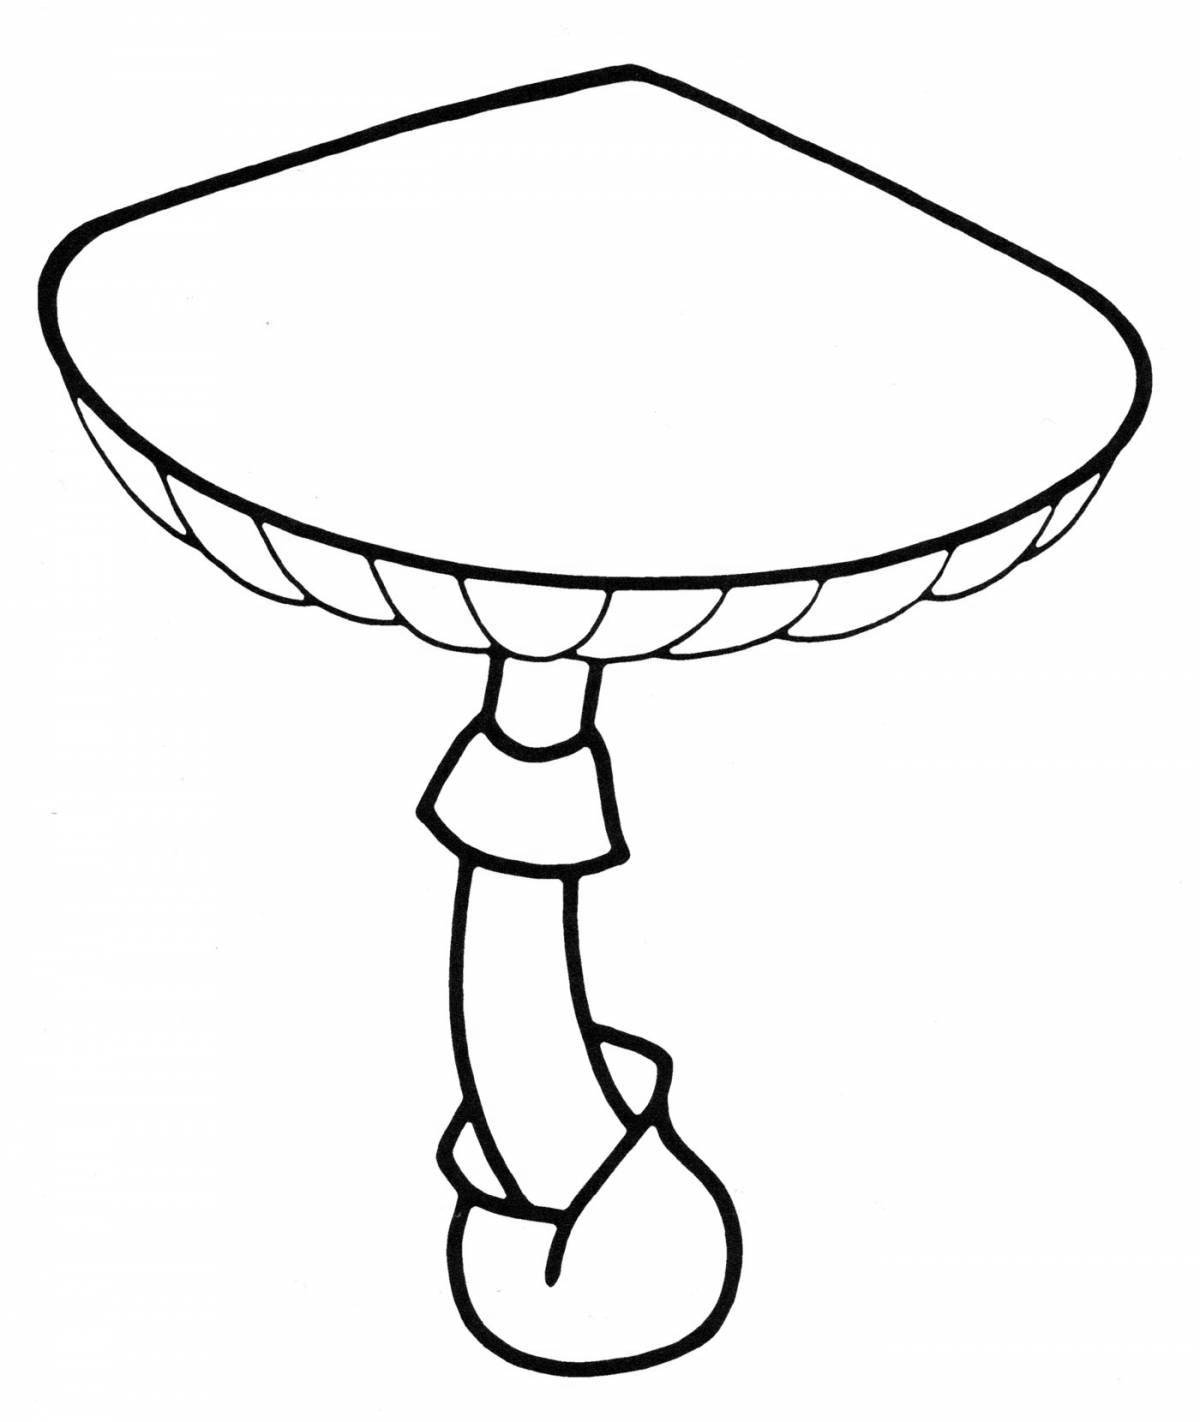 Deathcap flavored coloring page